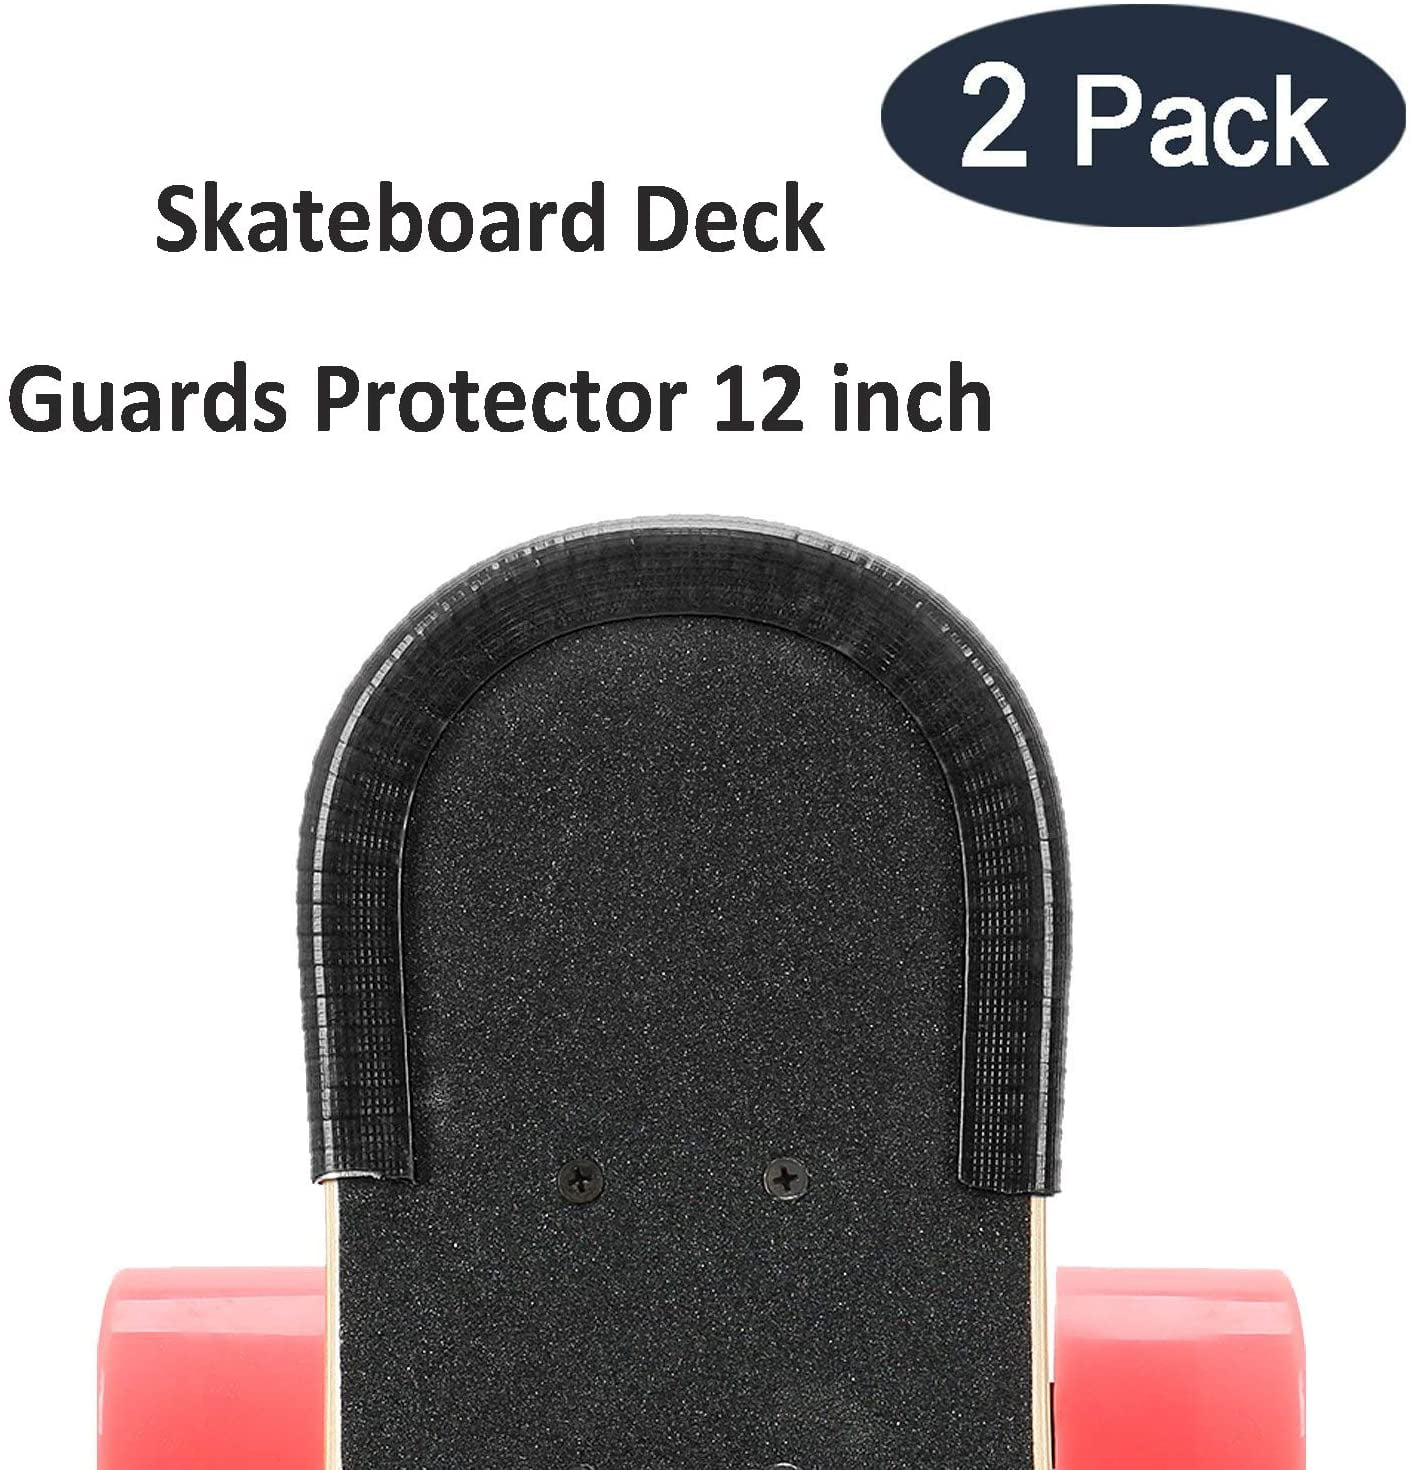 Deck Skateboard Guards Protector Excellent Edge Protection Longboard Nose Guard 